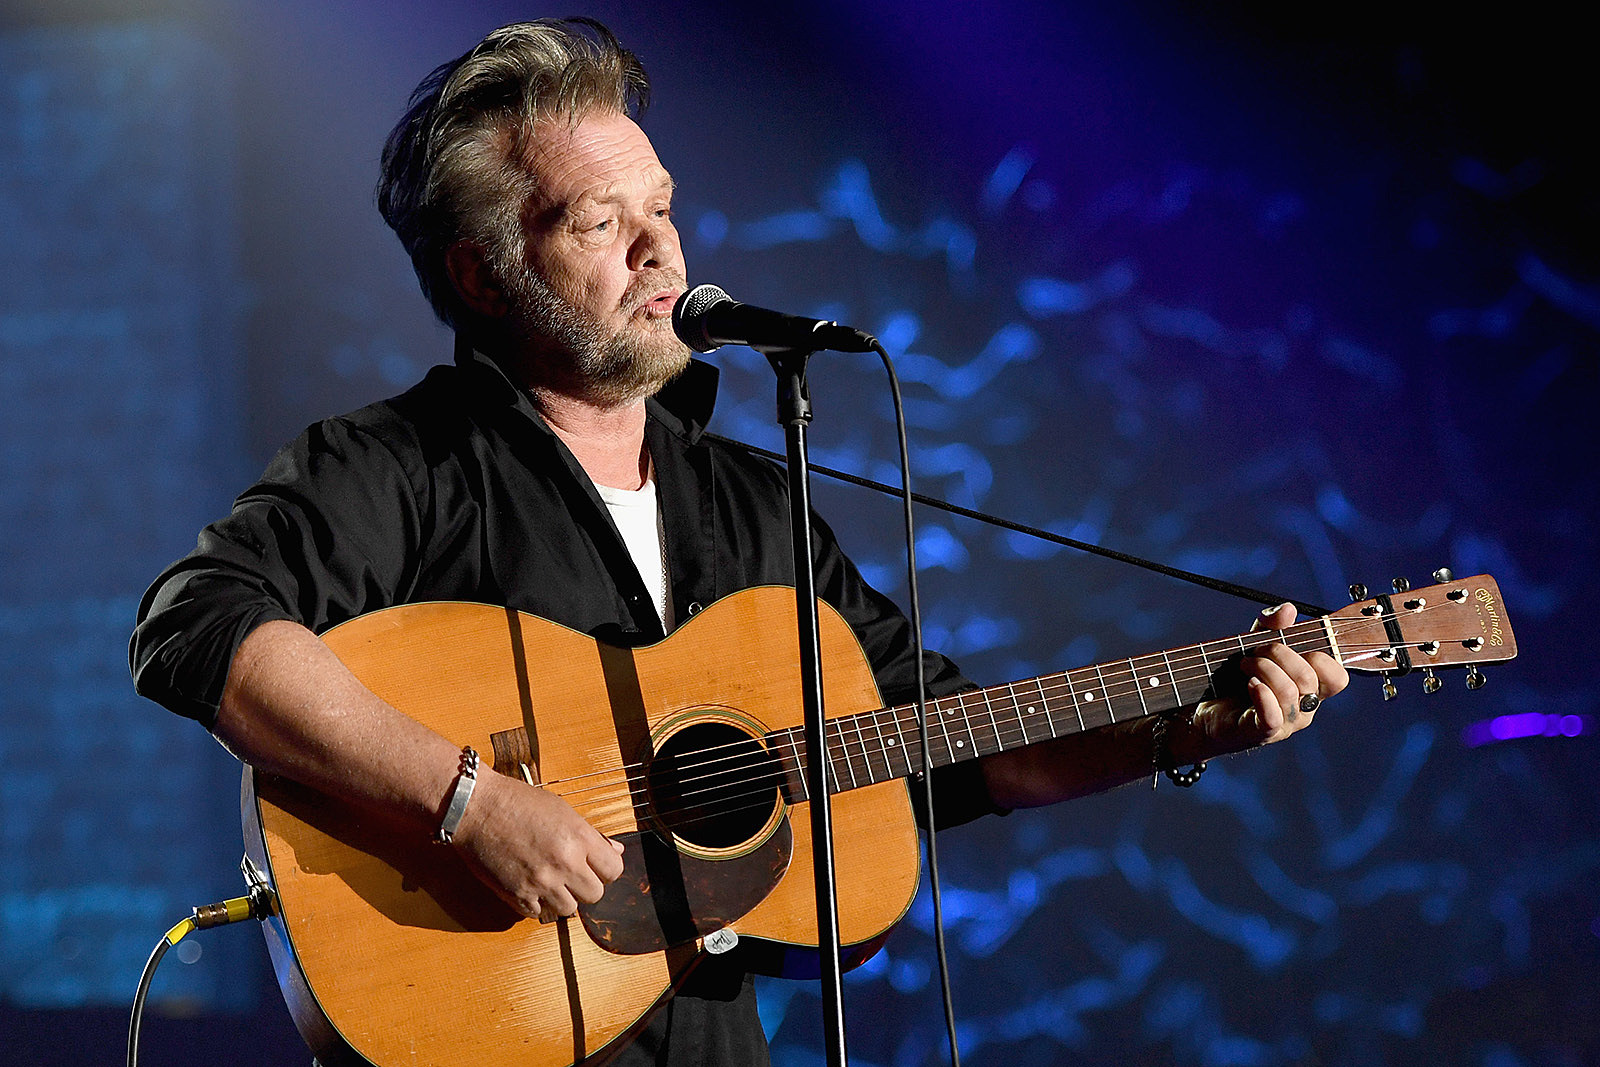 John Mellencamp Likes the Effect Smoking Has Had on His Voice